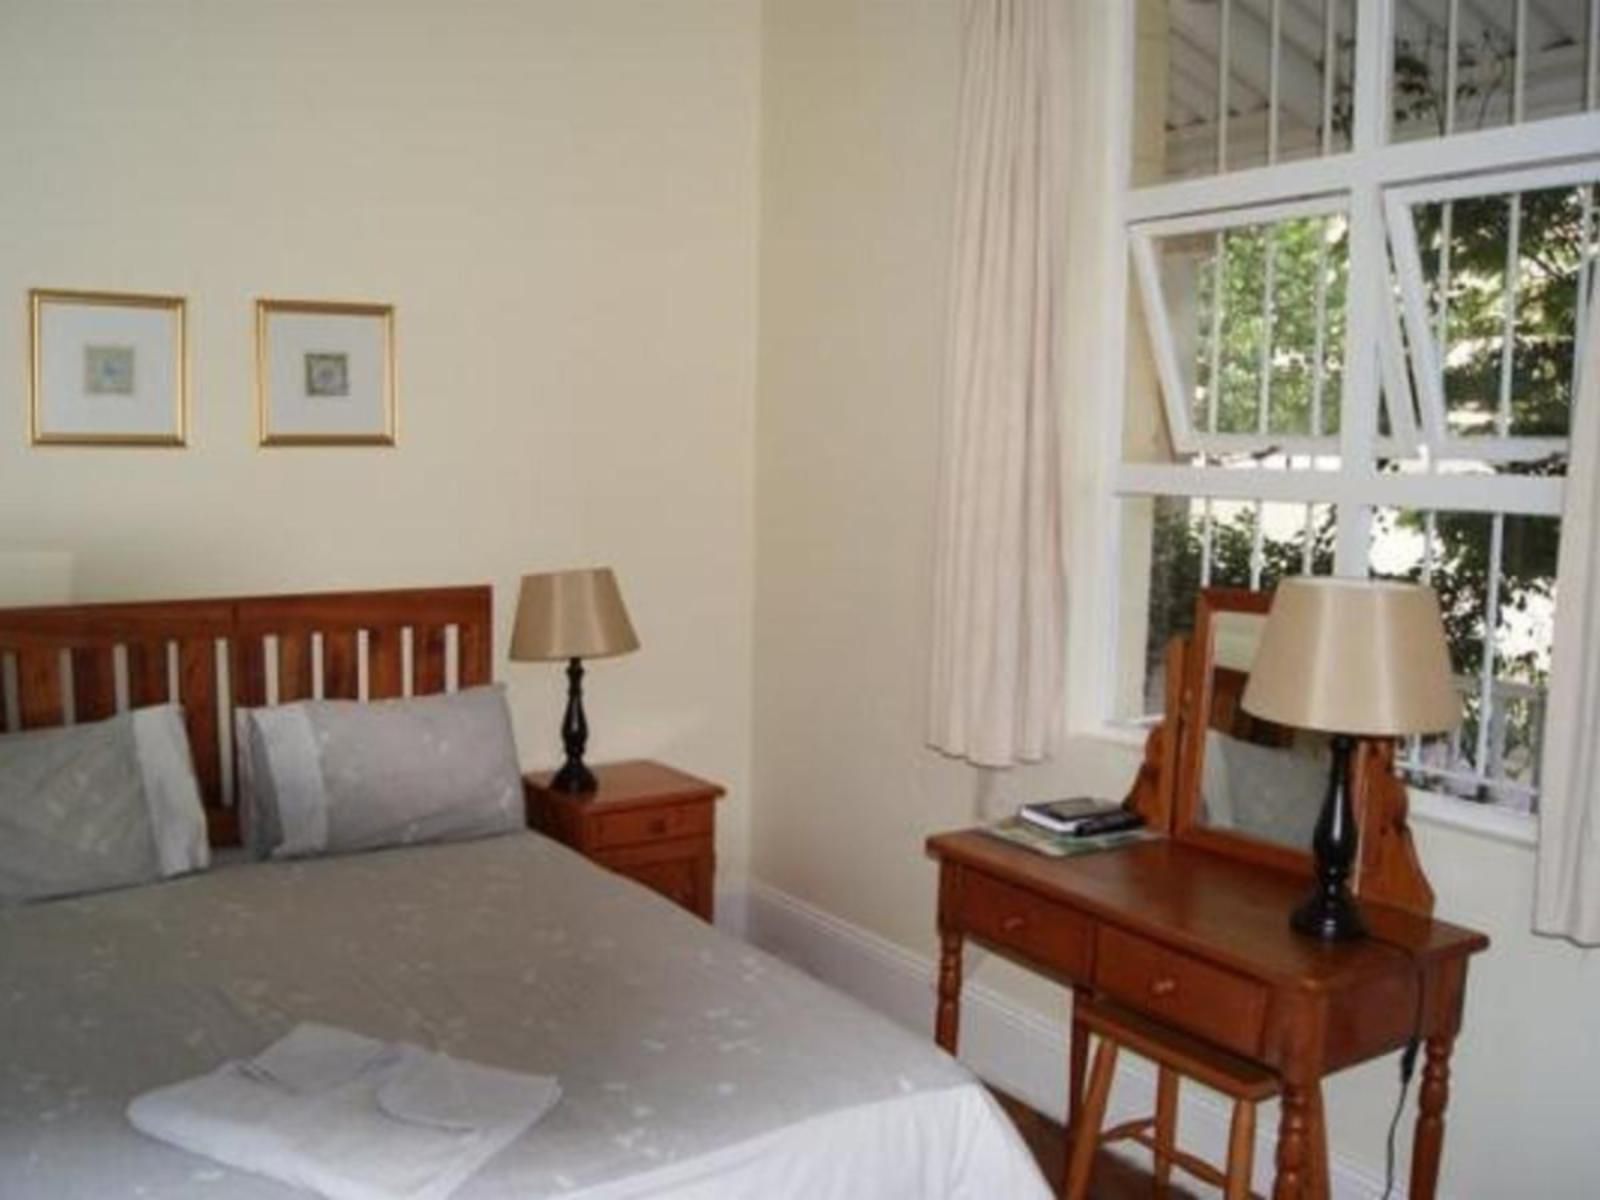 Sommersby Guest House Morningside Durban Kwazulu Natal South Africa Window, Architecture, Bedroom